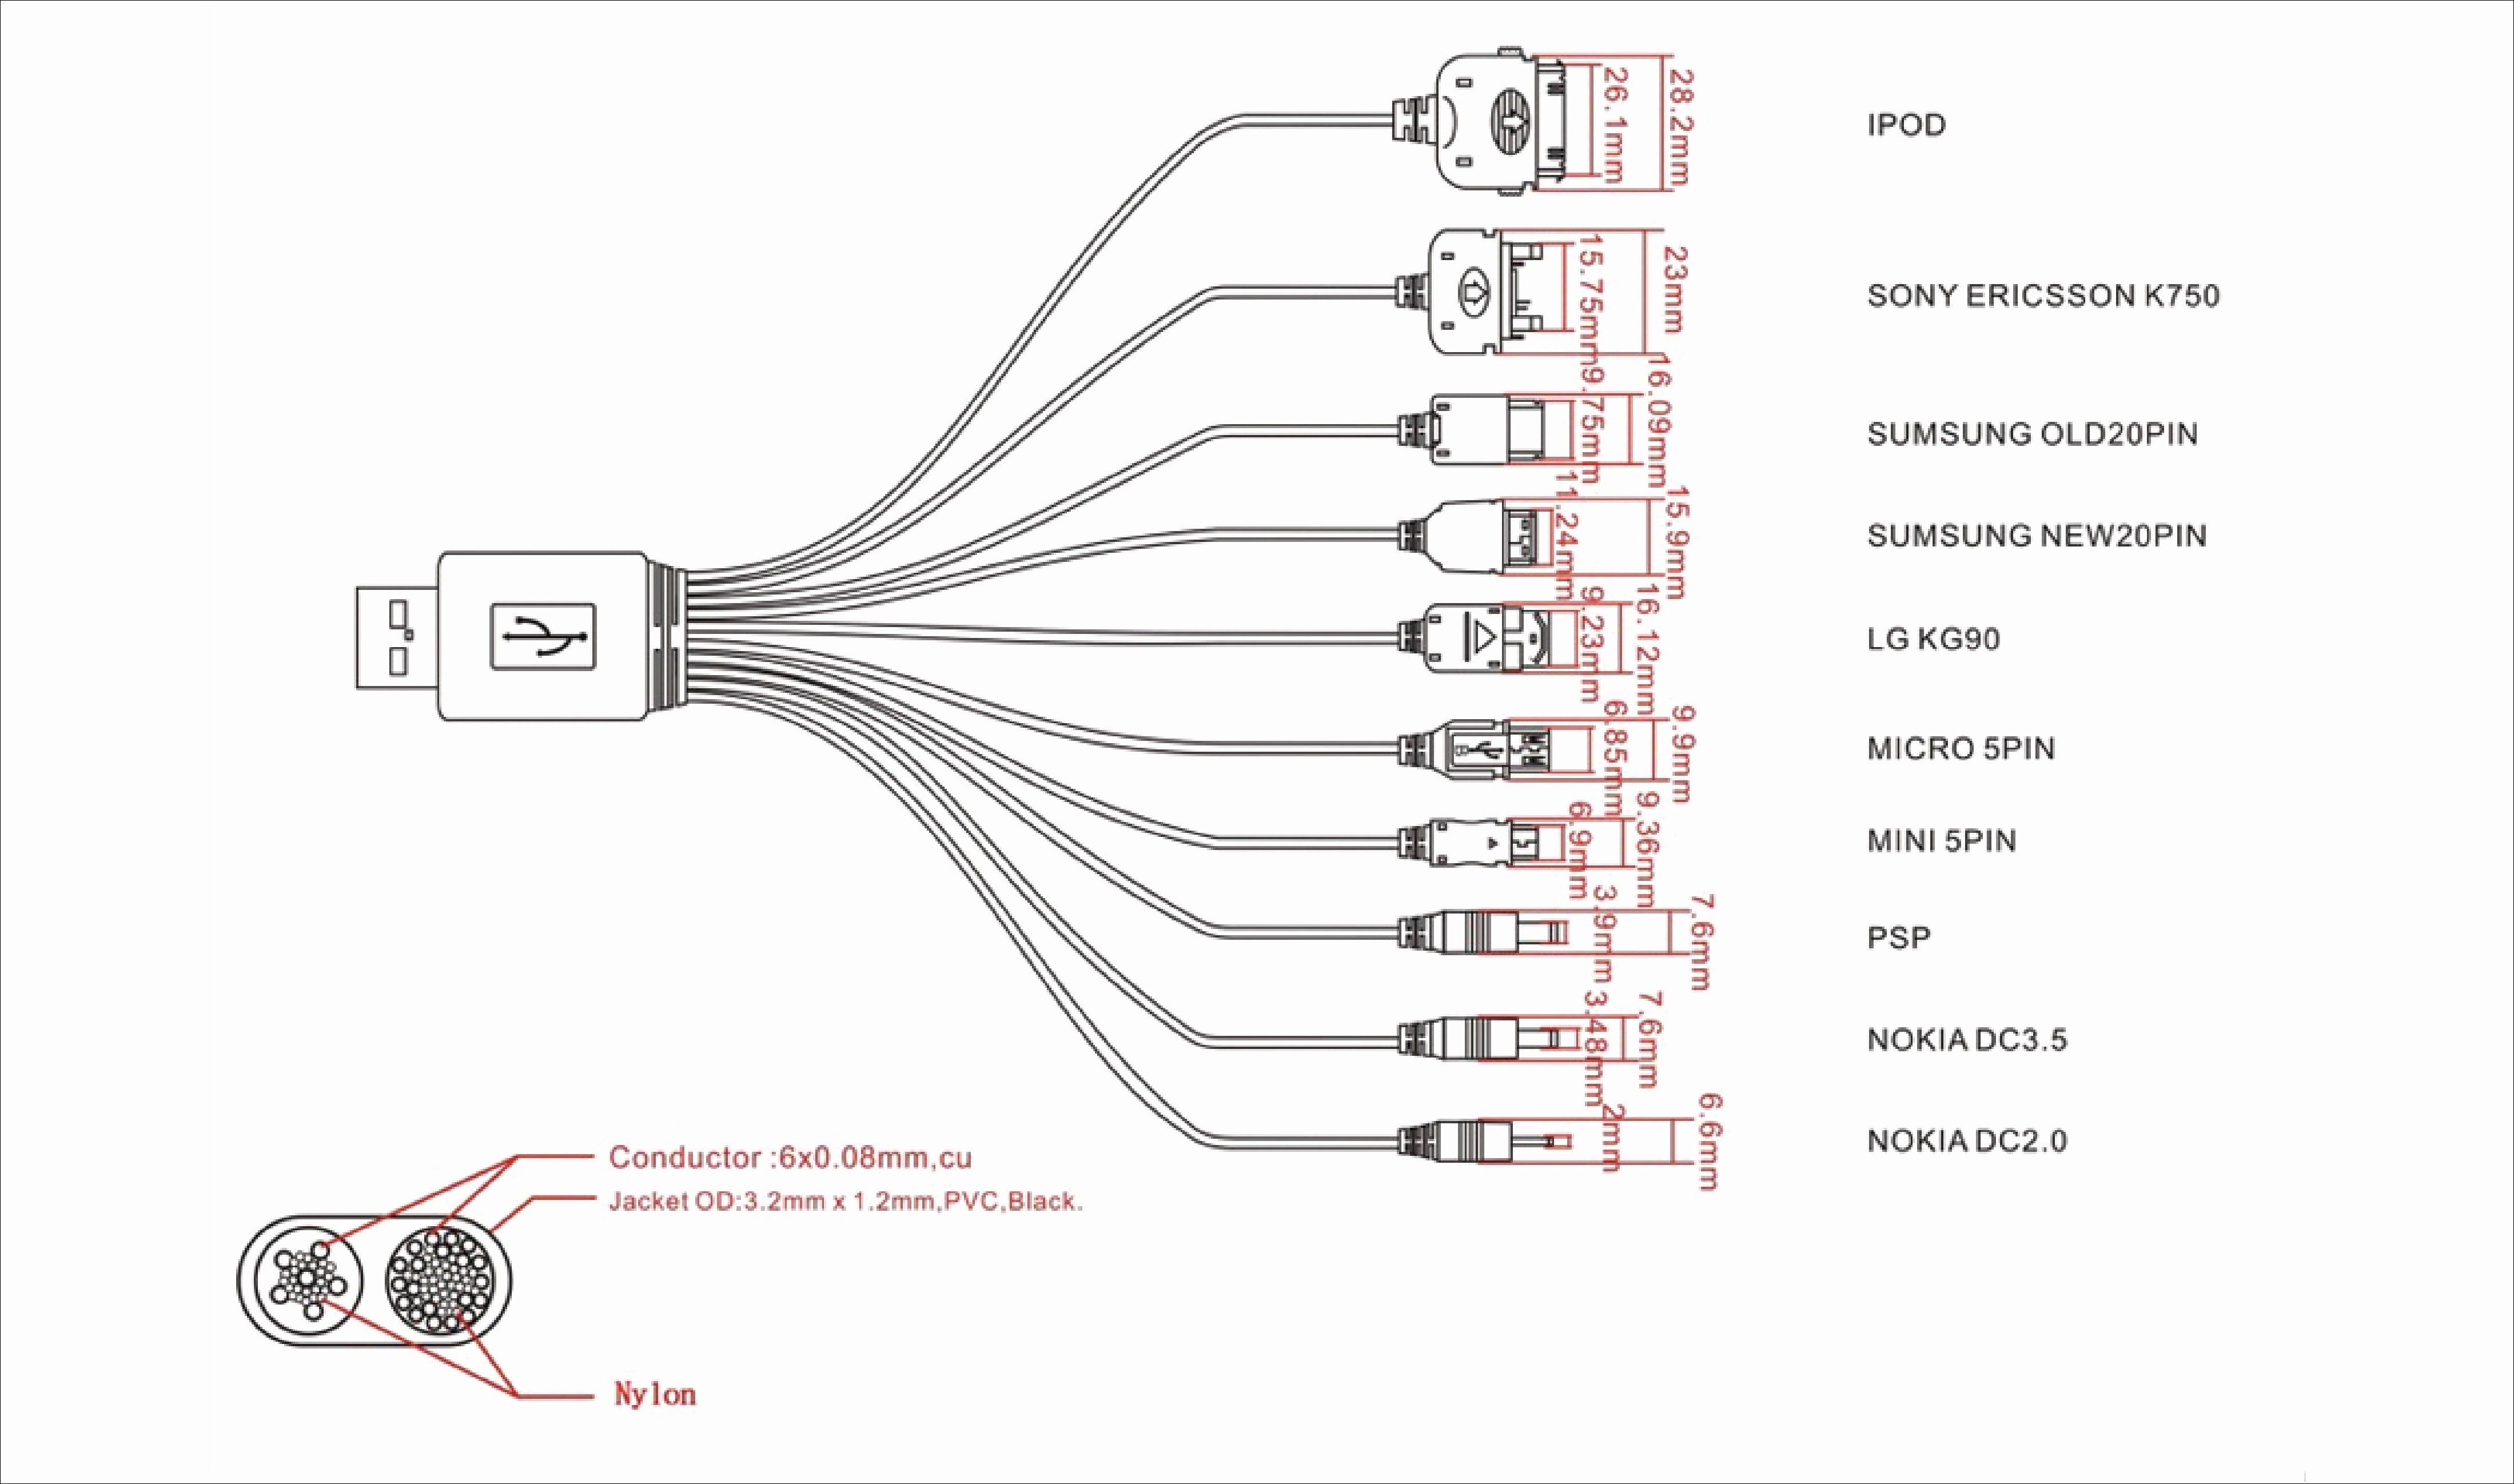 av wiring diagrams for ipod wiring diagram img mix av plugs wiring diagrams wiring diagram centre Ipod Data Cable